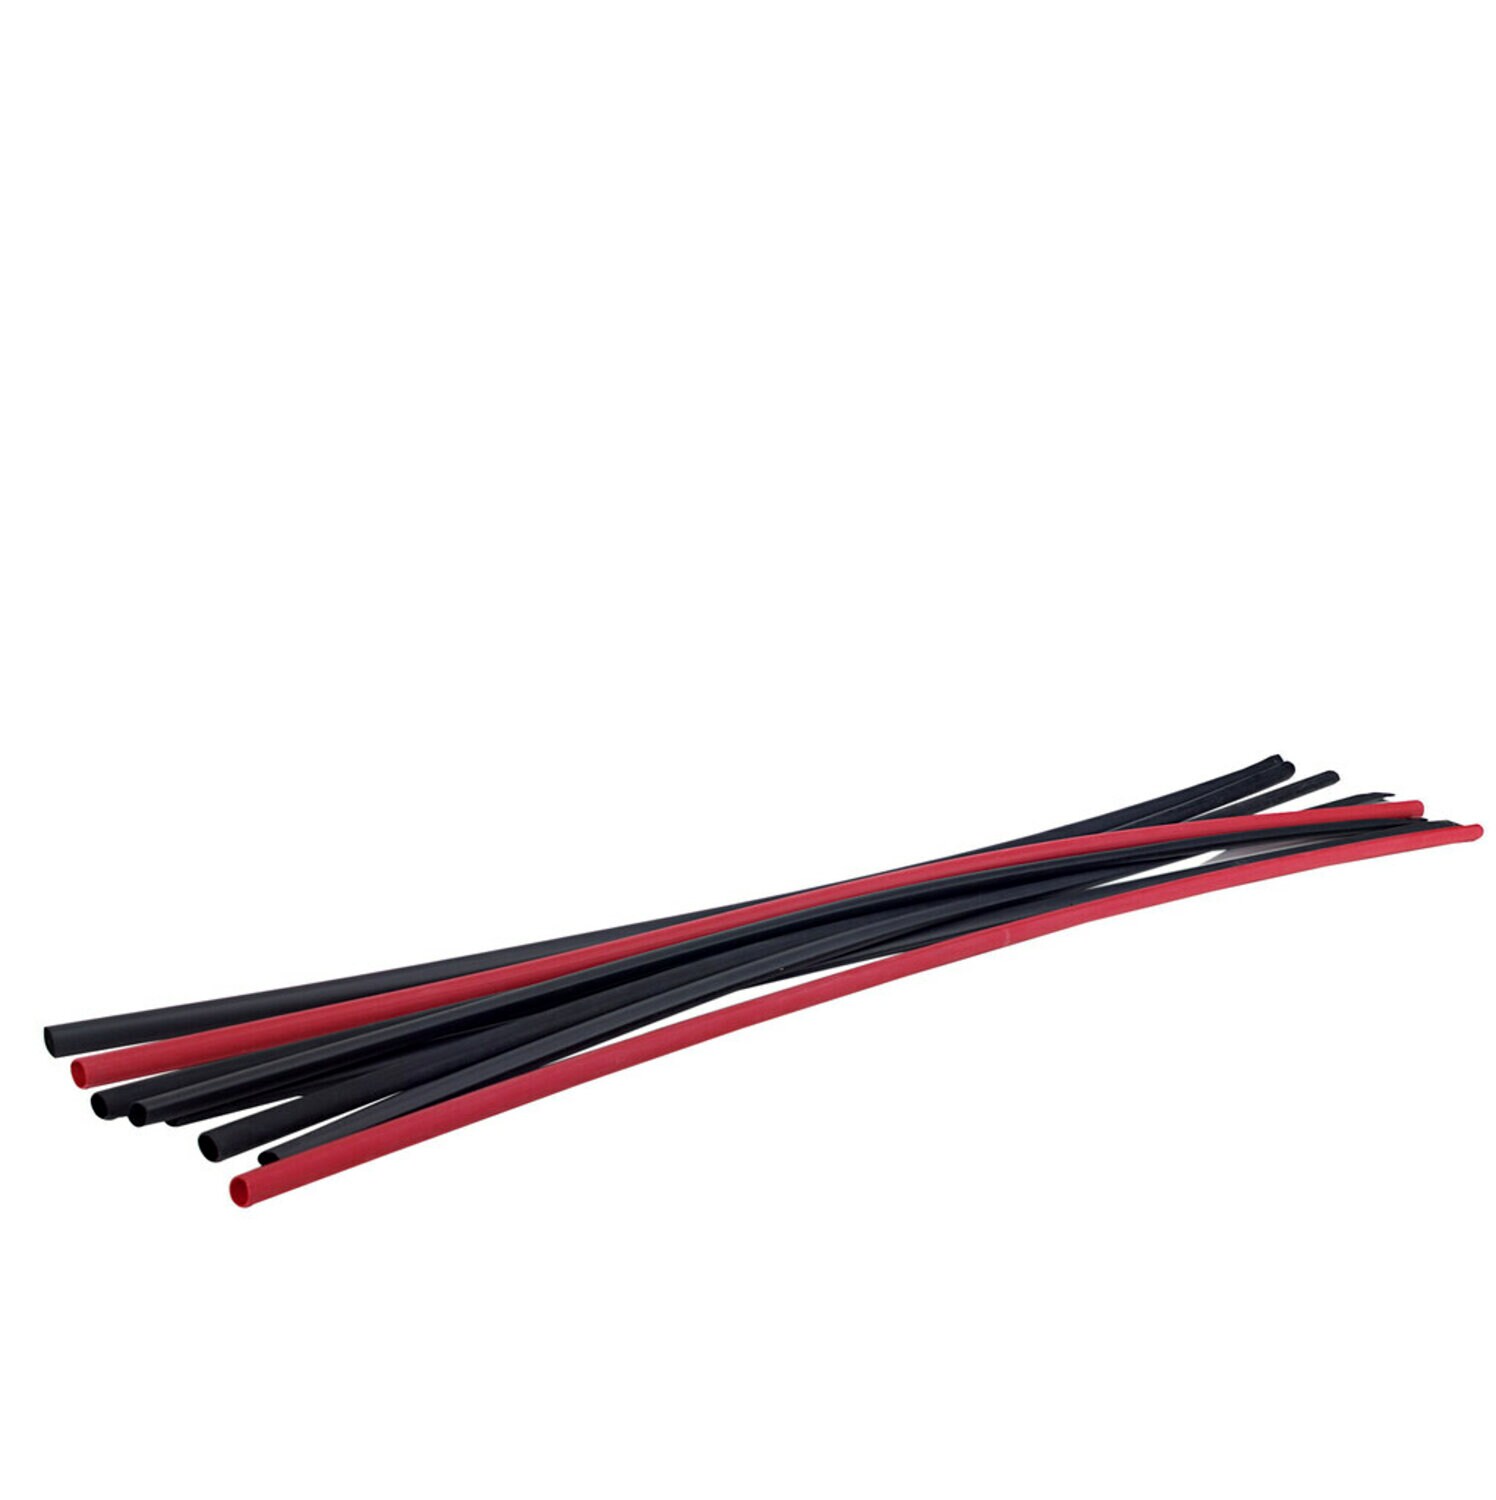 7010400176 - 3M Heat Shrink Thin-Wall Tubing FP-301-1/16-48"-Red-Hdr-25 Pcs, 48 in
Length sticks with header label, 25 pieces/case